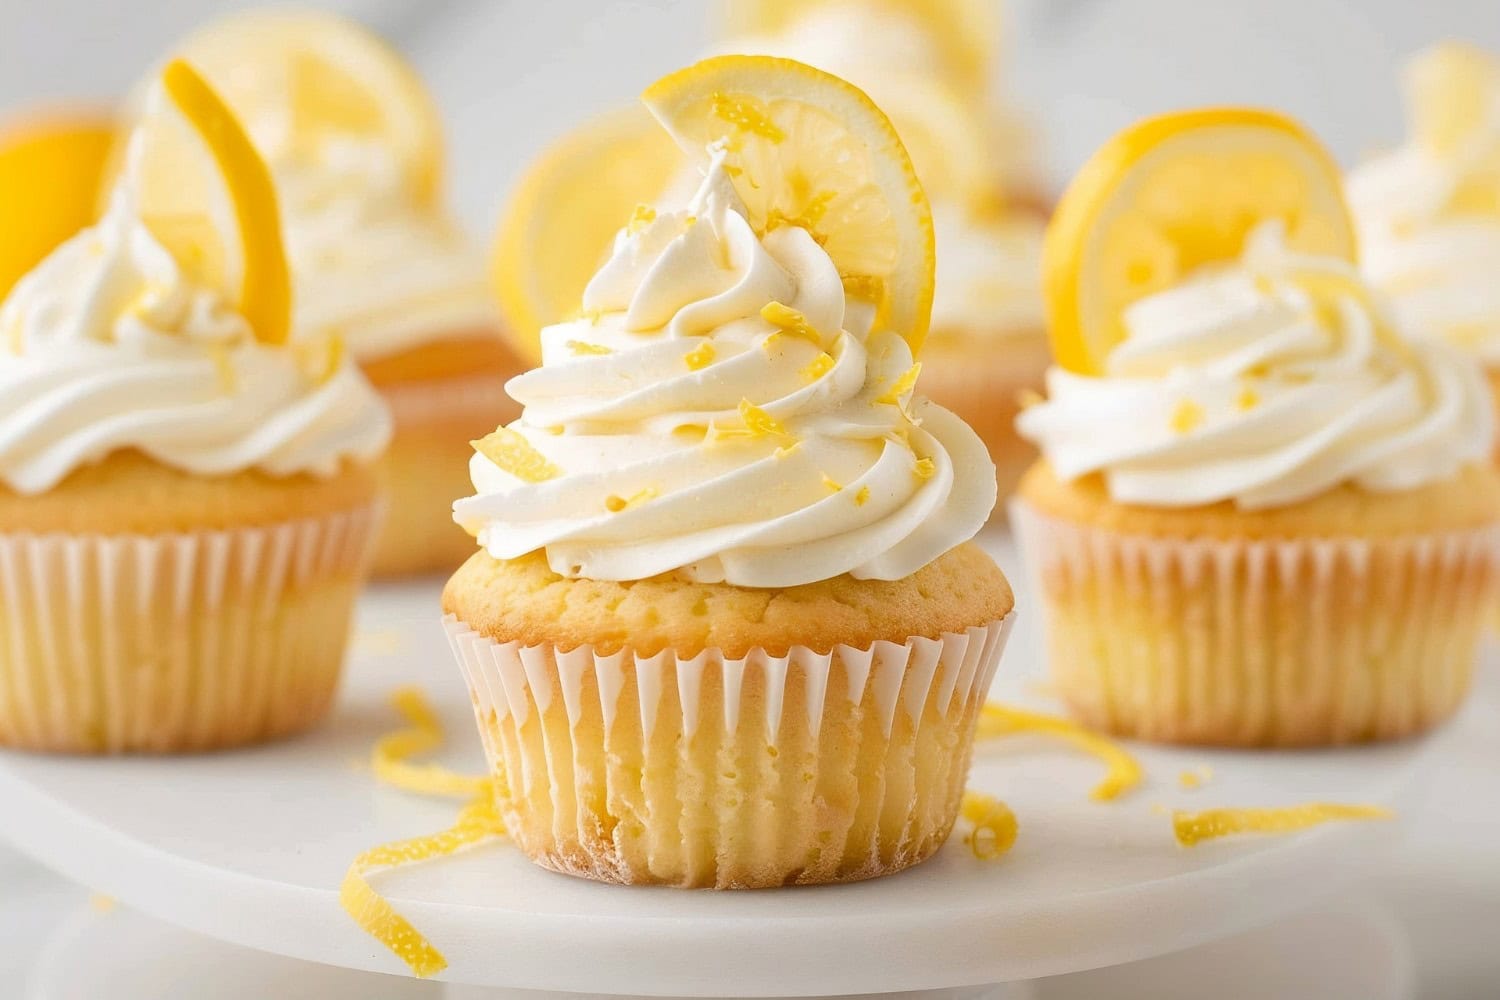 Cupcakes topped with lemon cream cheese frosting